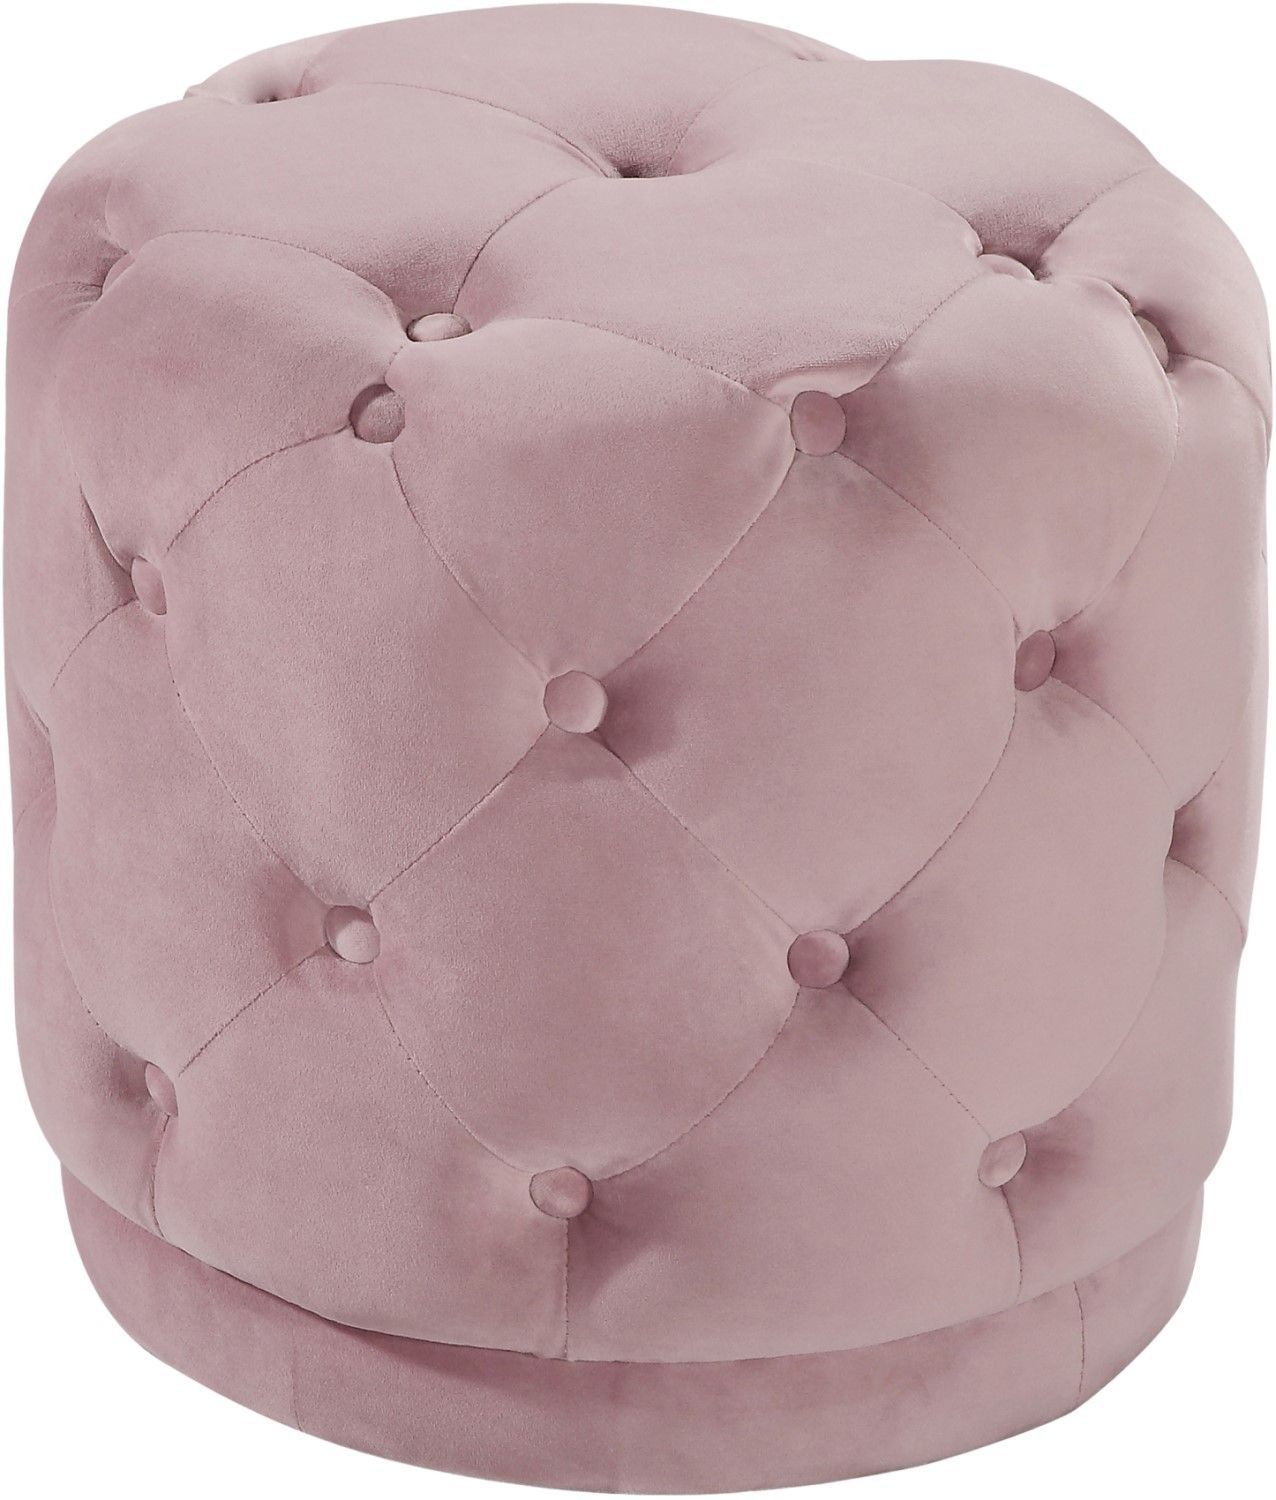 Carlinn Contemporary Deep Button Tufted Ottoman Stool Pouf In Light Pertaining To Glam Light Pink Velvet Tufted Ottomans (View 19 of 20)